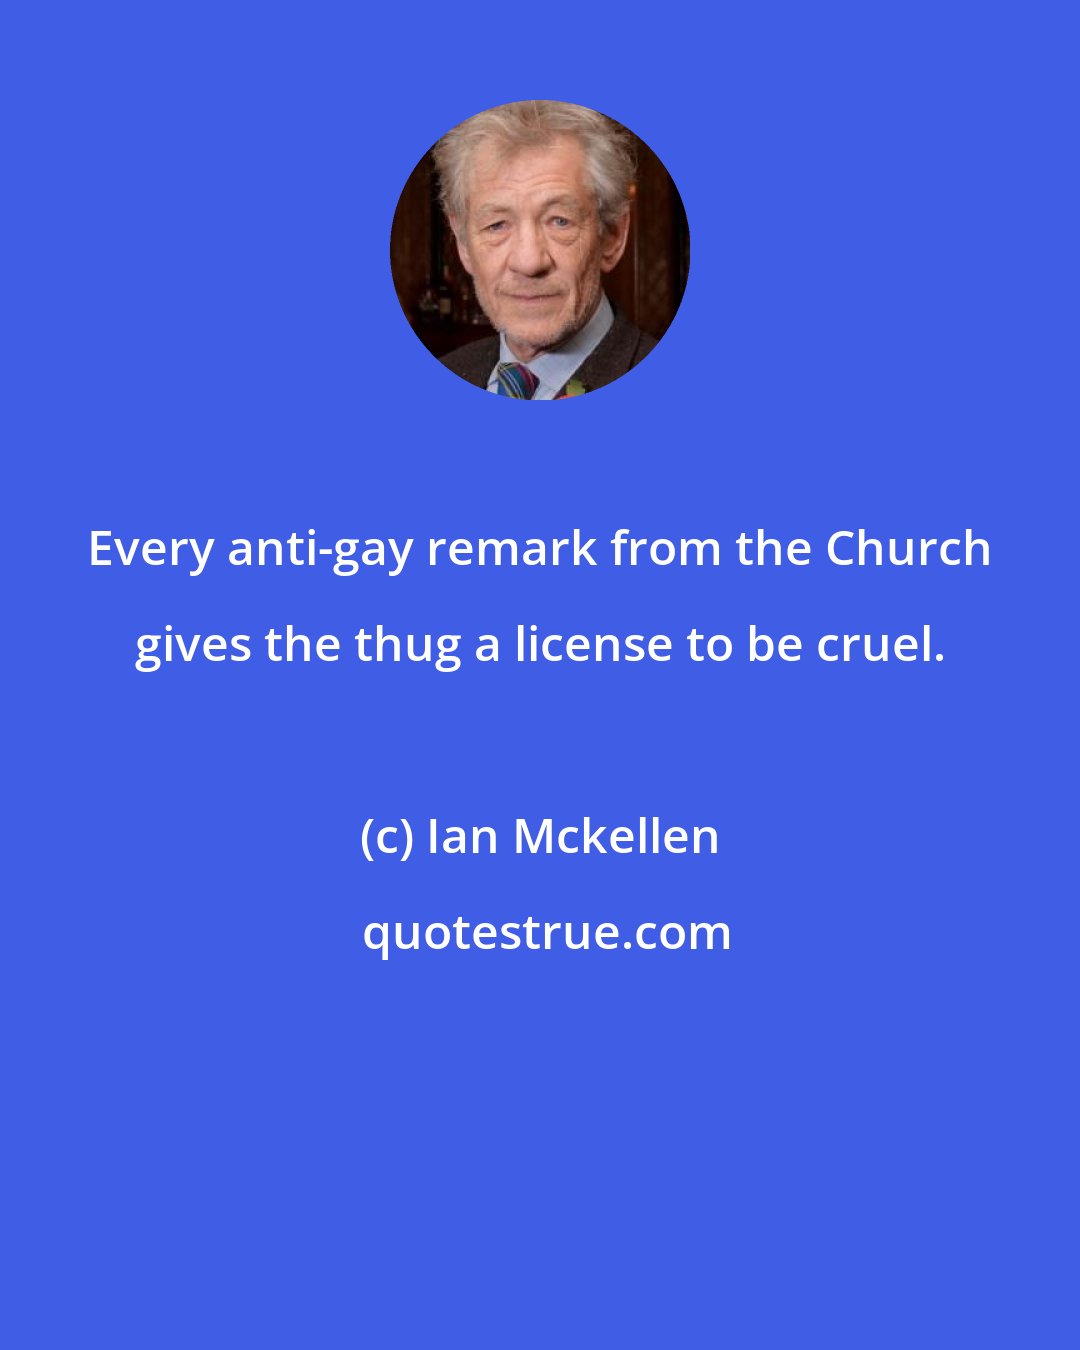 Ian Mckellen: Every anti-gay remark from the Church gives the thug a license to be cruel.